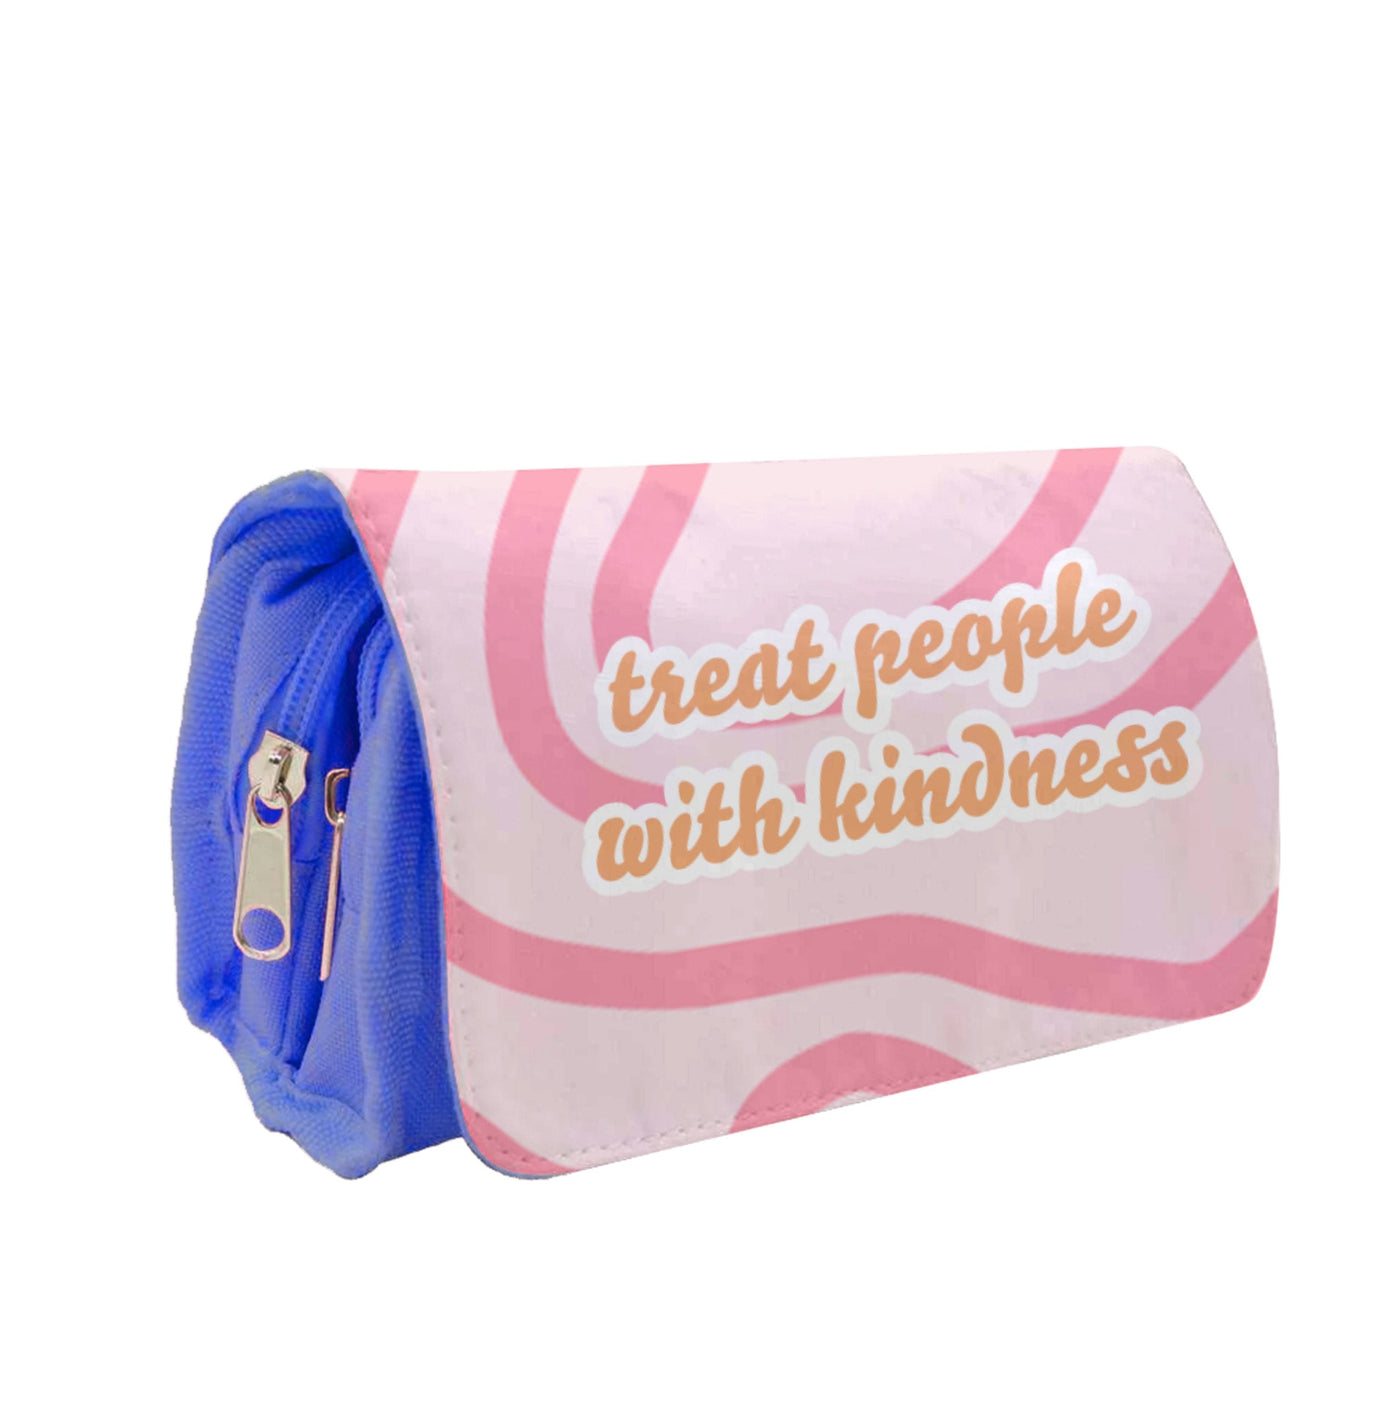 Treat People With Kindness - Harry Pencil Case